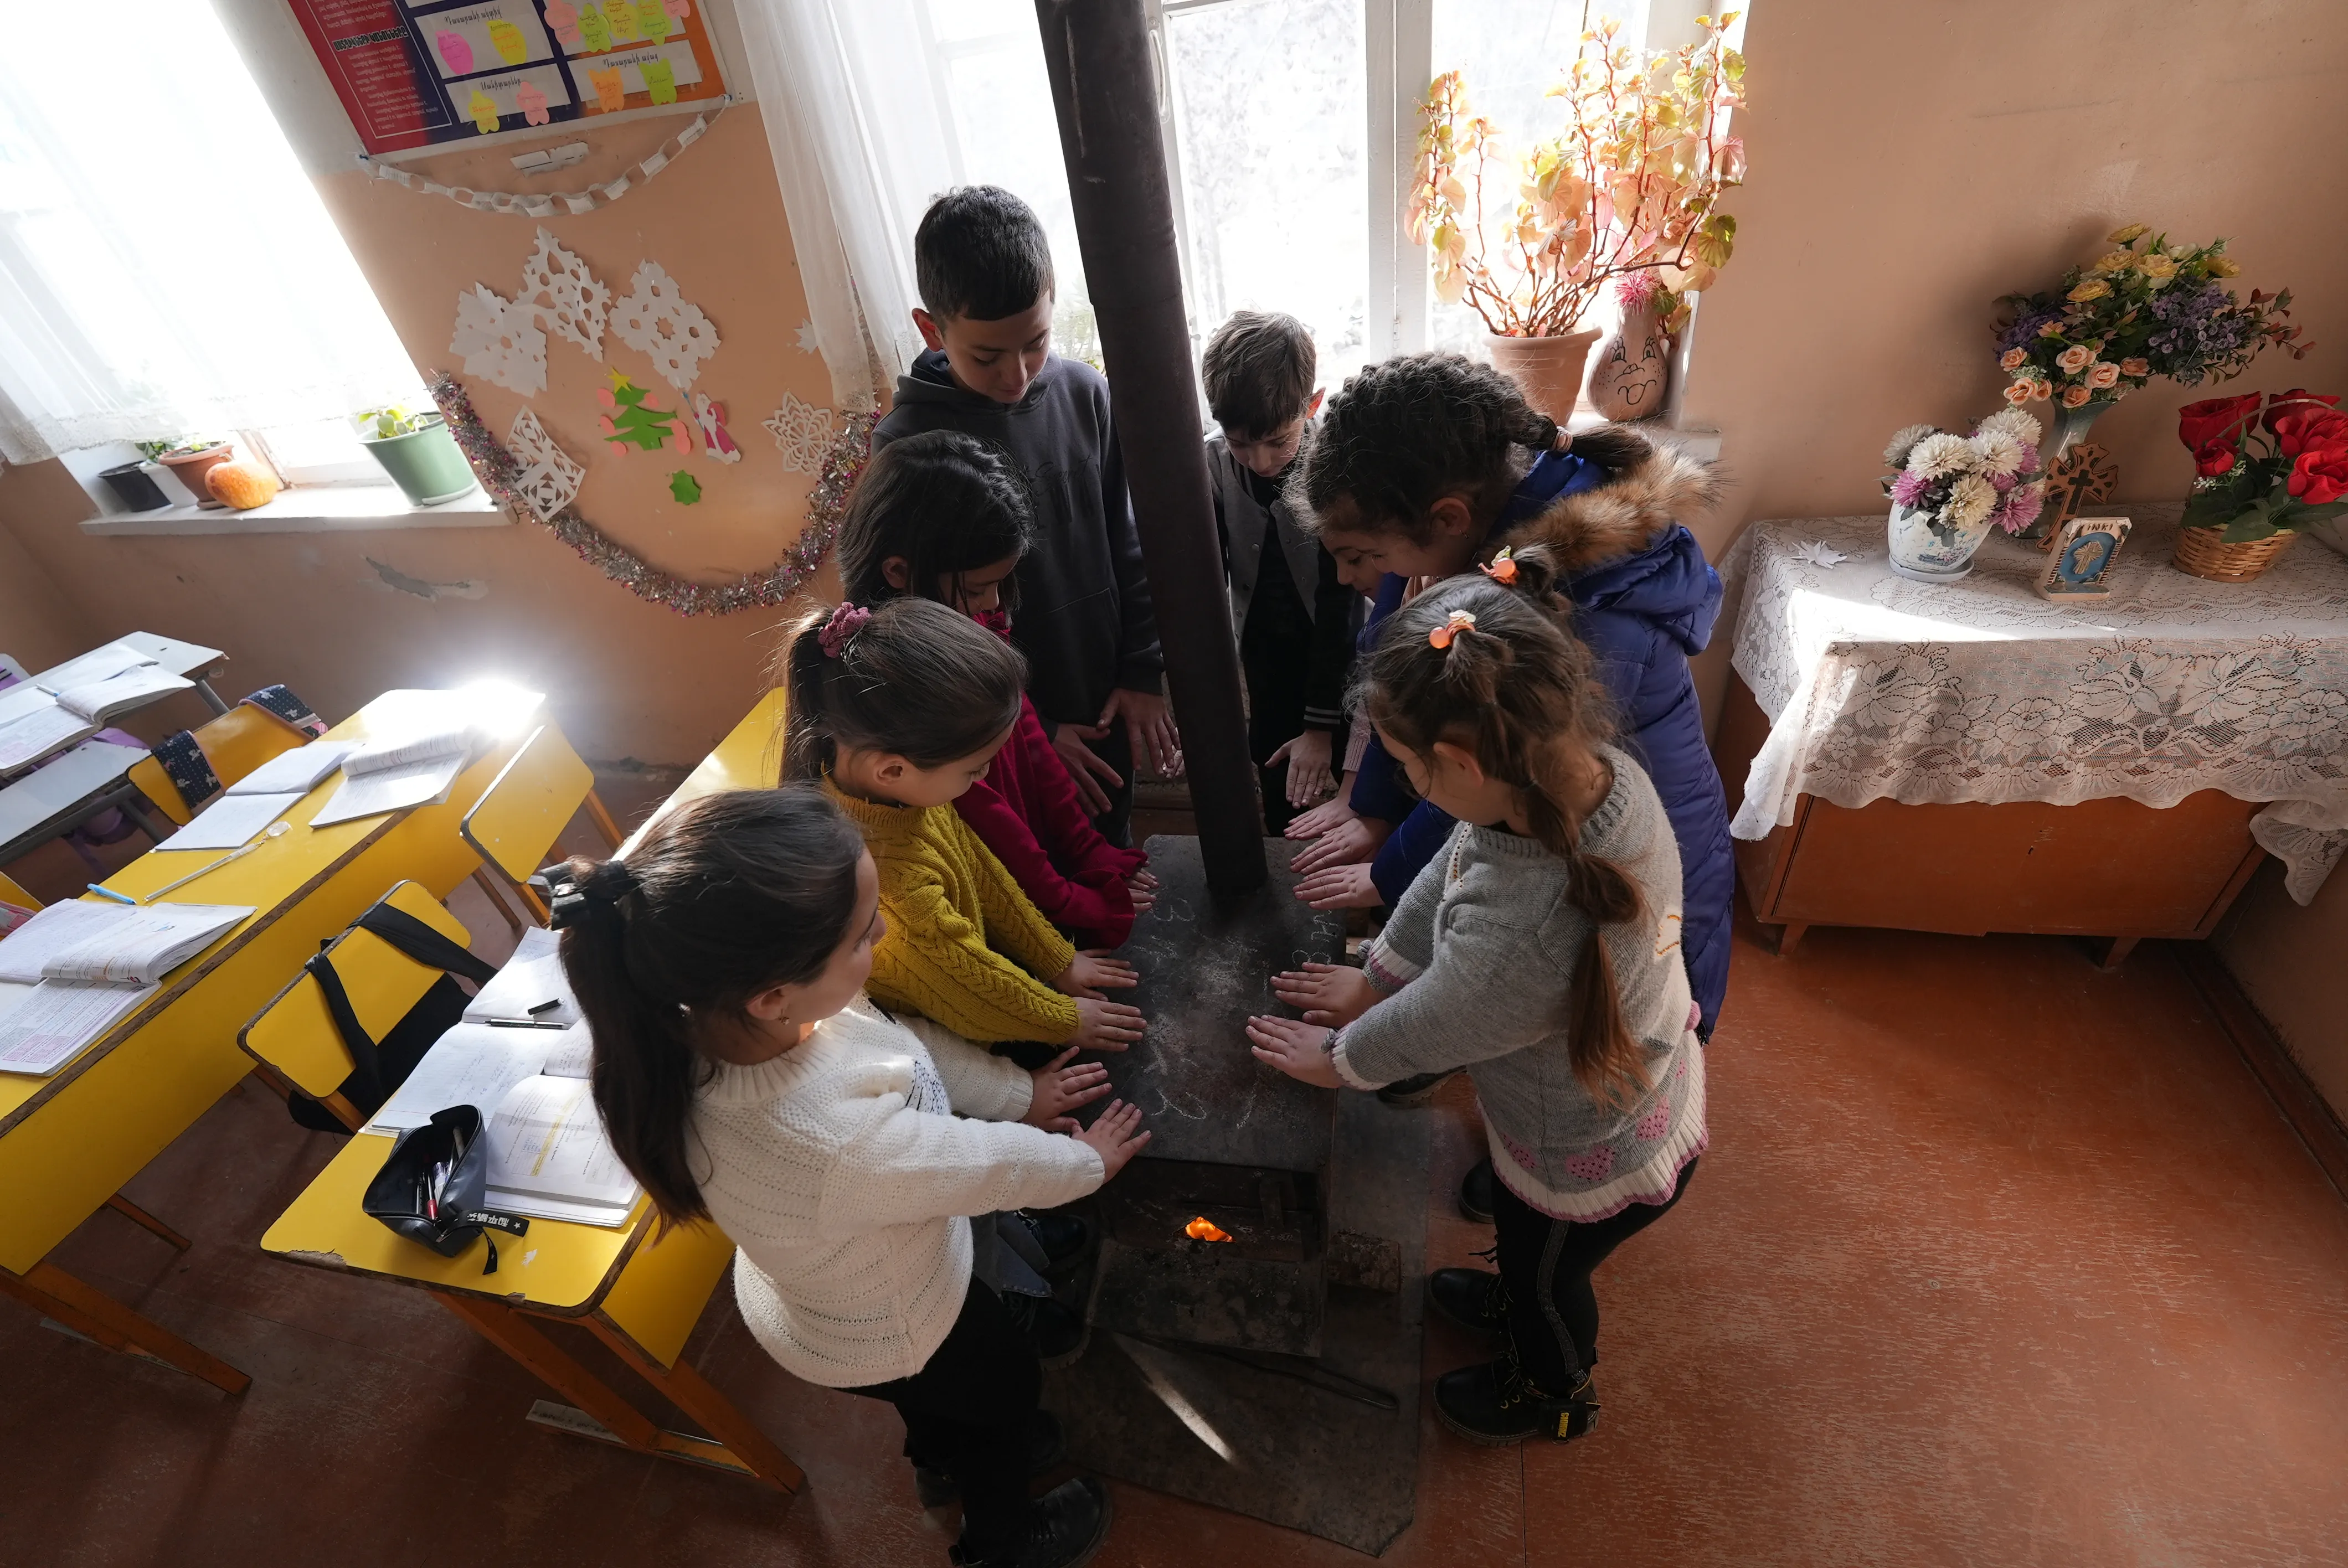 Children warming their hands over a wood-fired oven in Nagorno-Karabakh?w=200&h=150